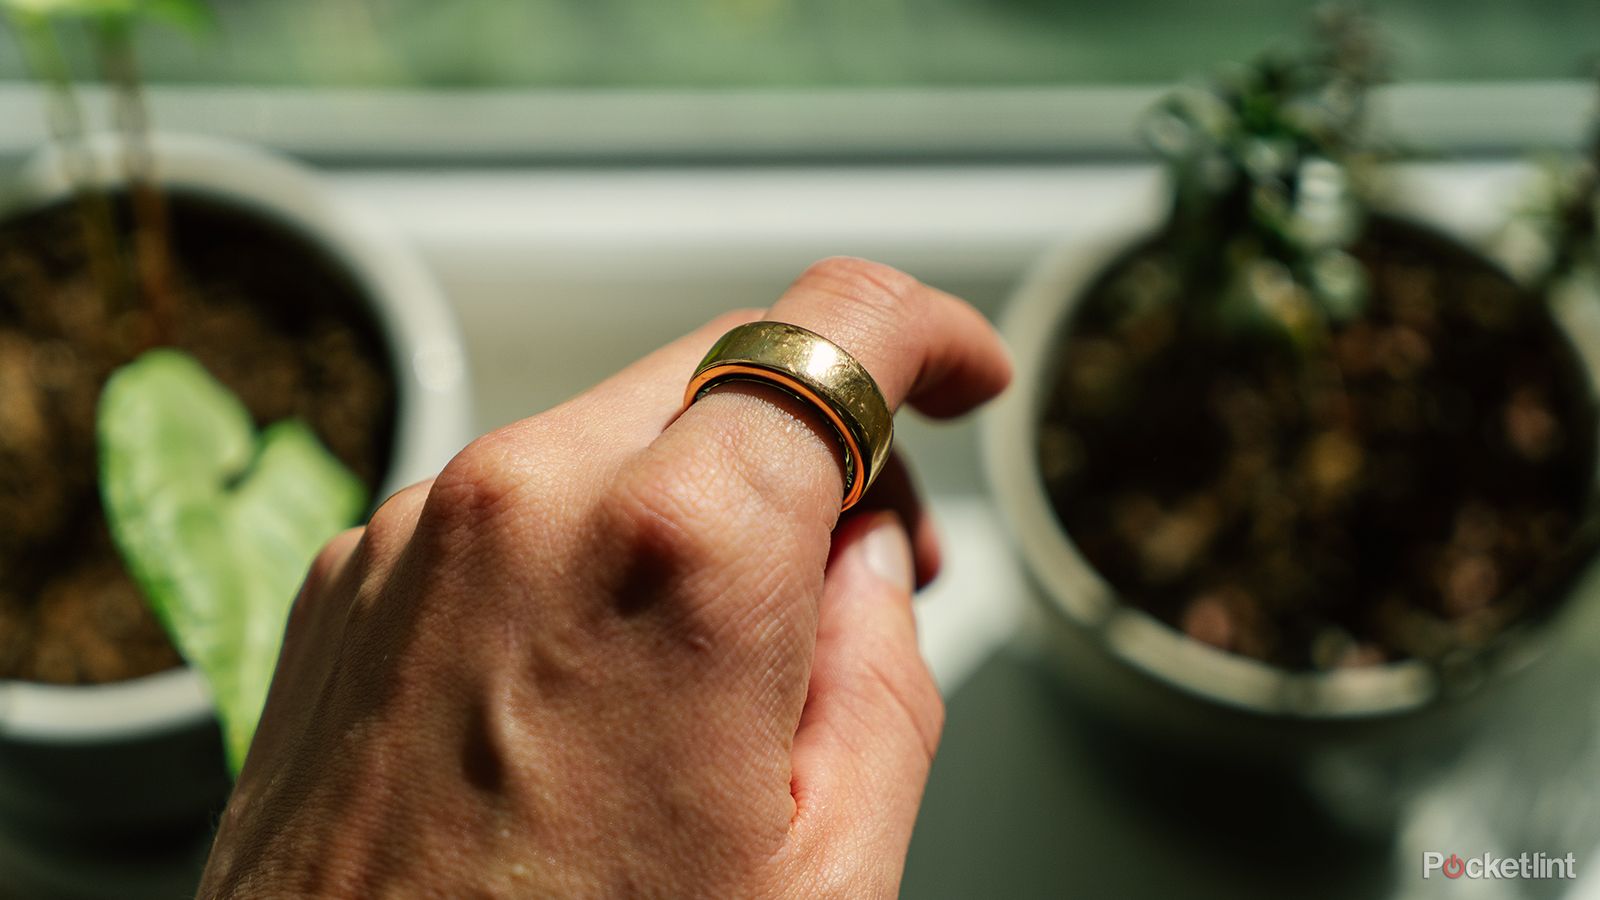 The Oura Ring on an index finger in front of plants on a windowsill.